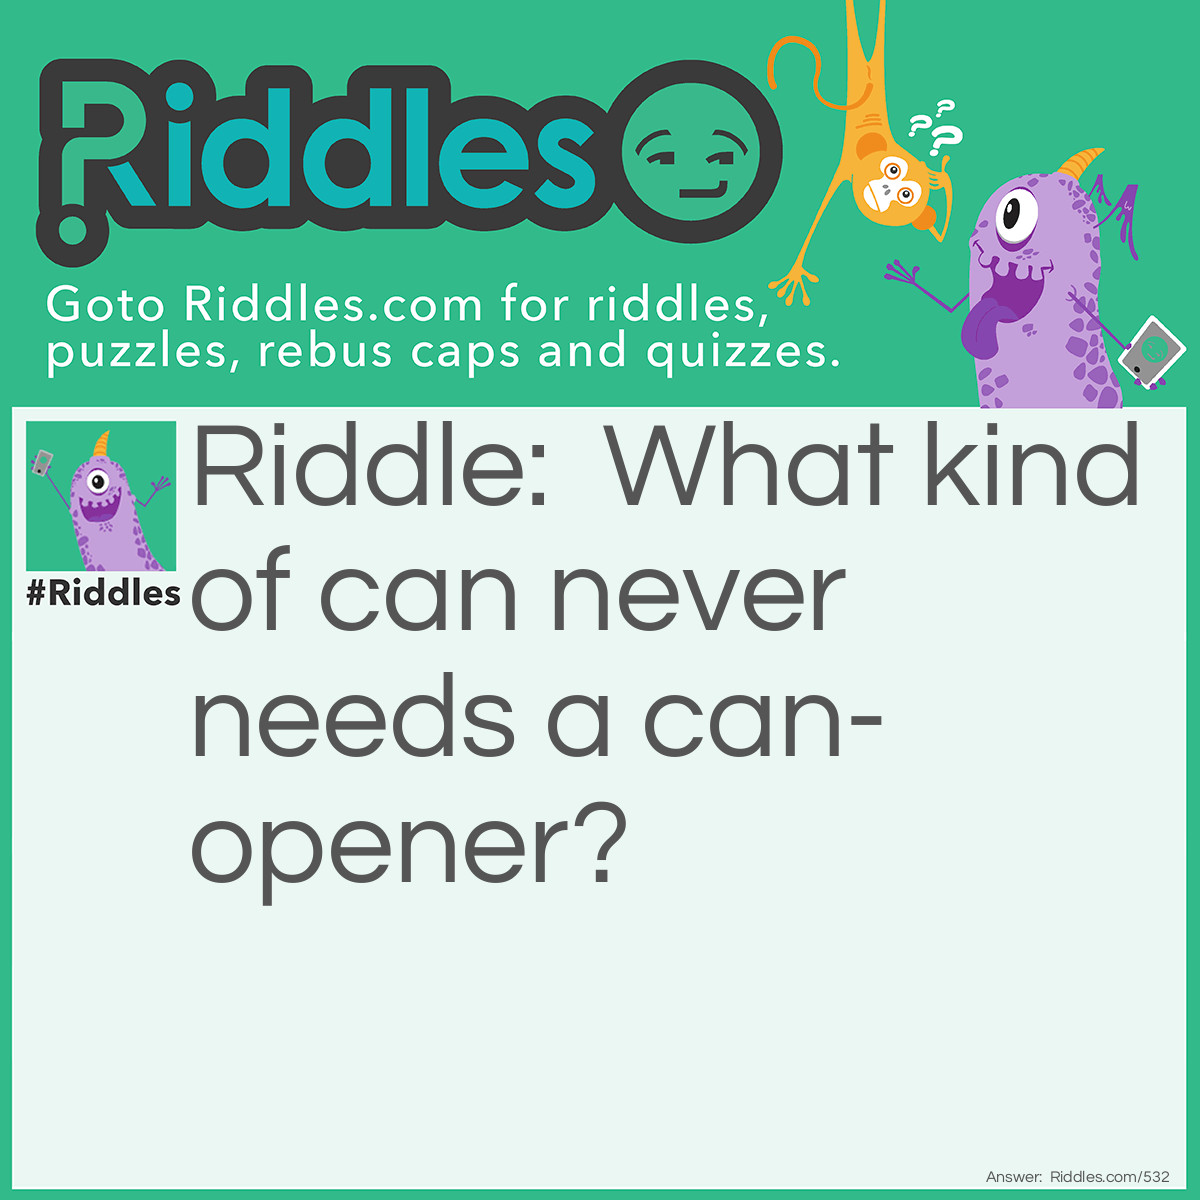 Riddle: What kind of can never needs a can-opener? Answer: A pelican!